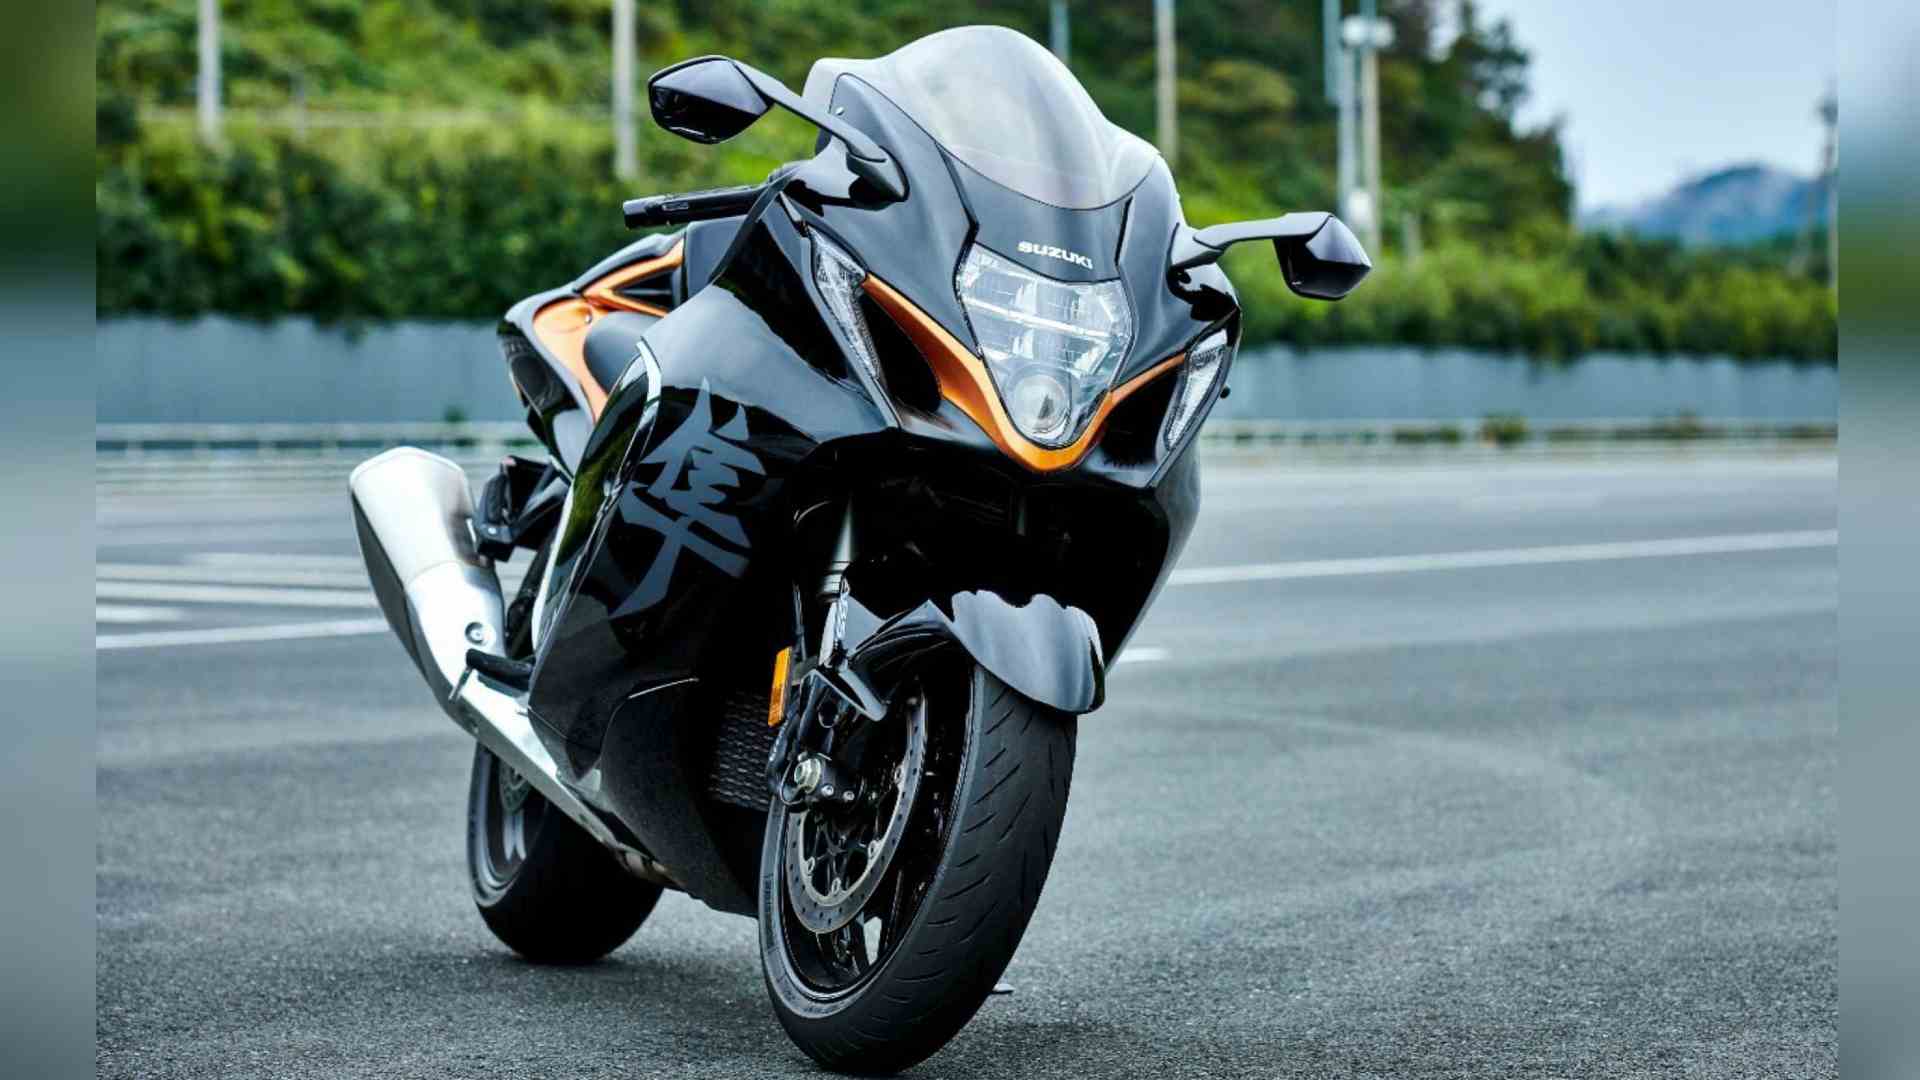 You are currently viewing New Suzuki Hayabusa launched in India at Rs 16.40 lakh, deliveries start in May 2021- Technology News, FP